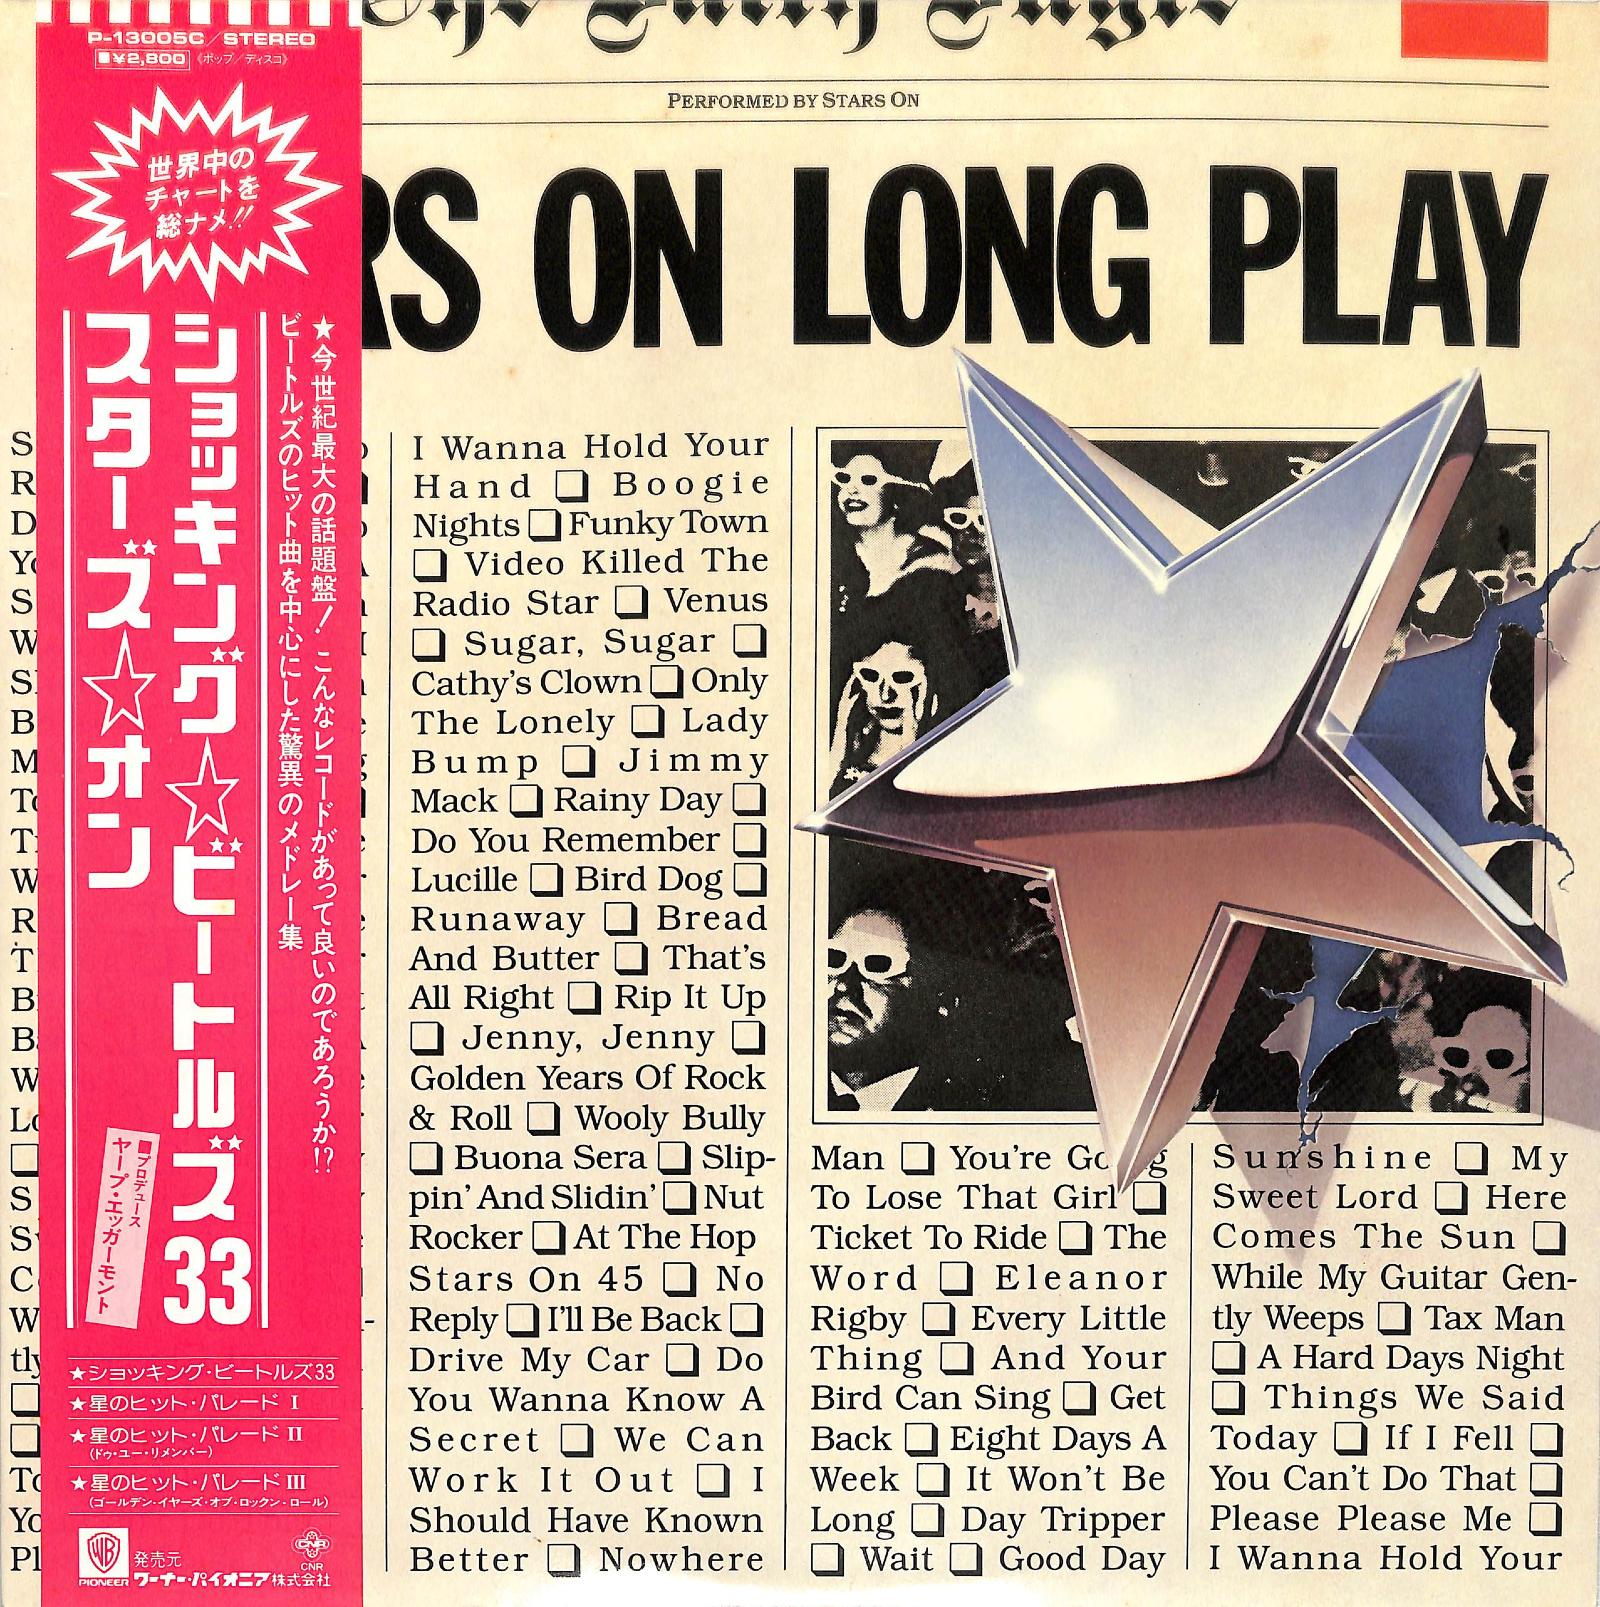 STARS ON / LONG TALL ERNIE AND THE SHAKERS - Stars On Long Play